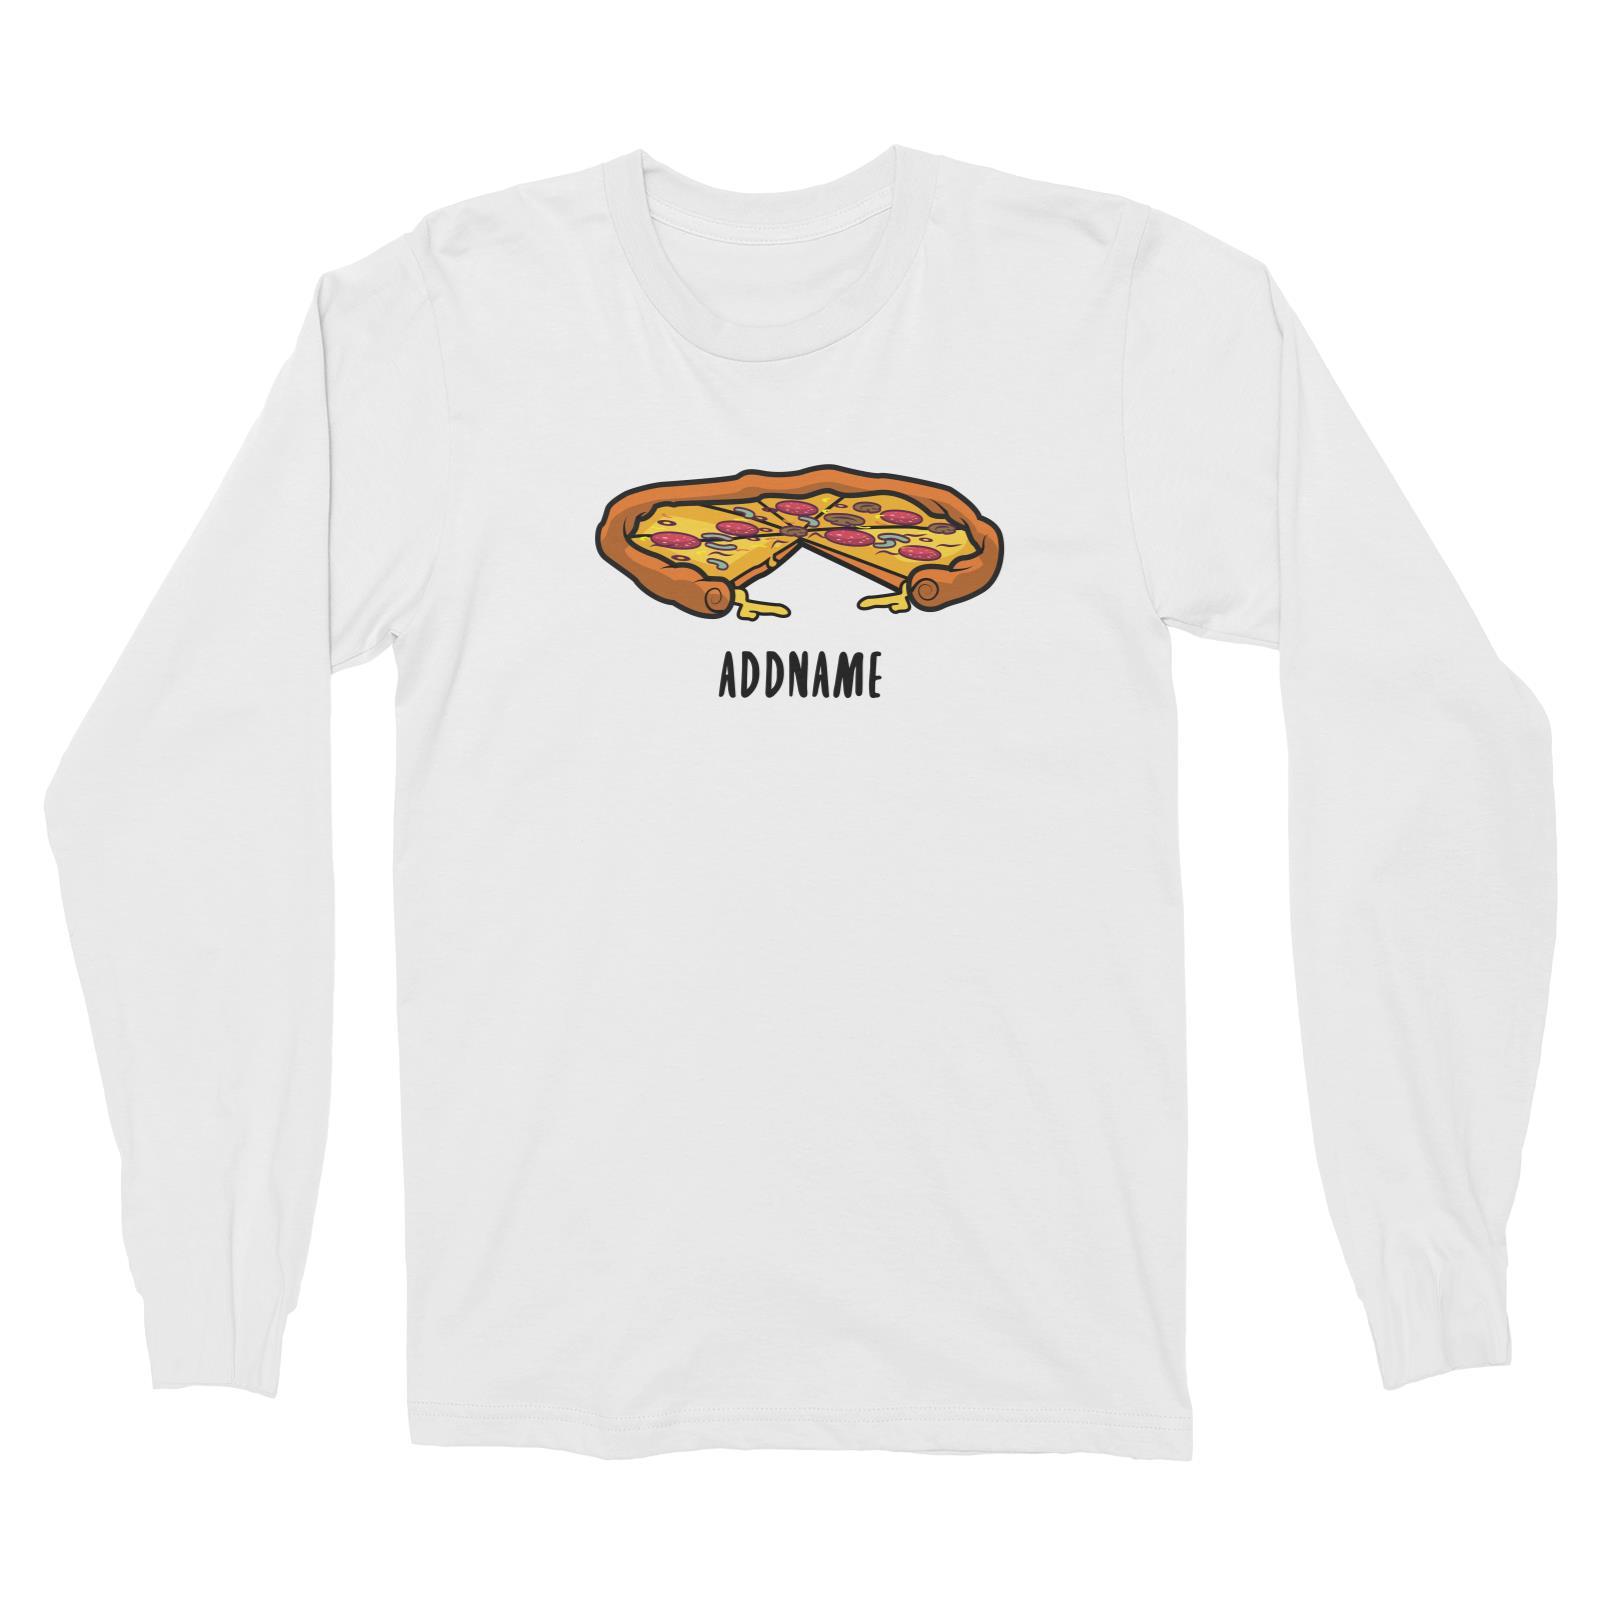 Fast Food Whole Pizza with A Slice Taken Out Addname Long Sleeve Unisex T-Shirt  Matching Family Comic Cartoon Personalizable Designs